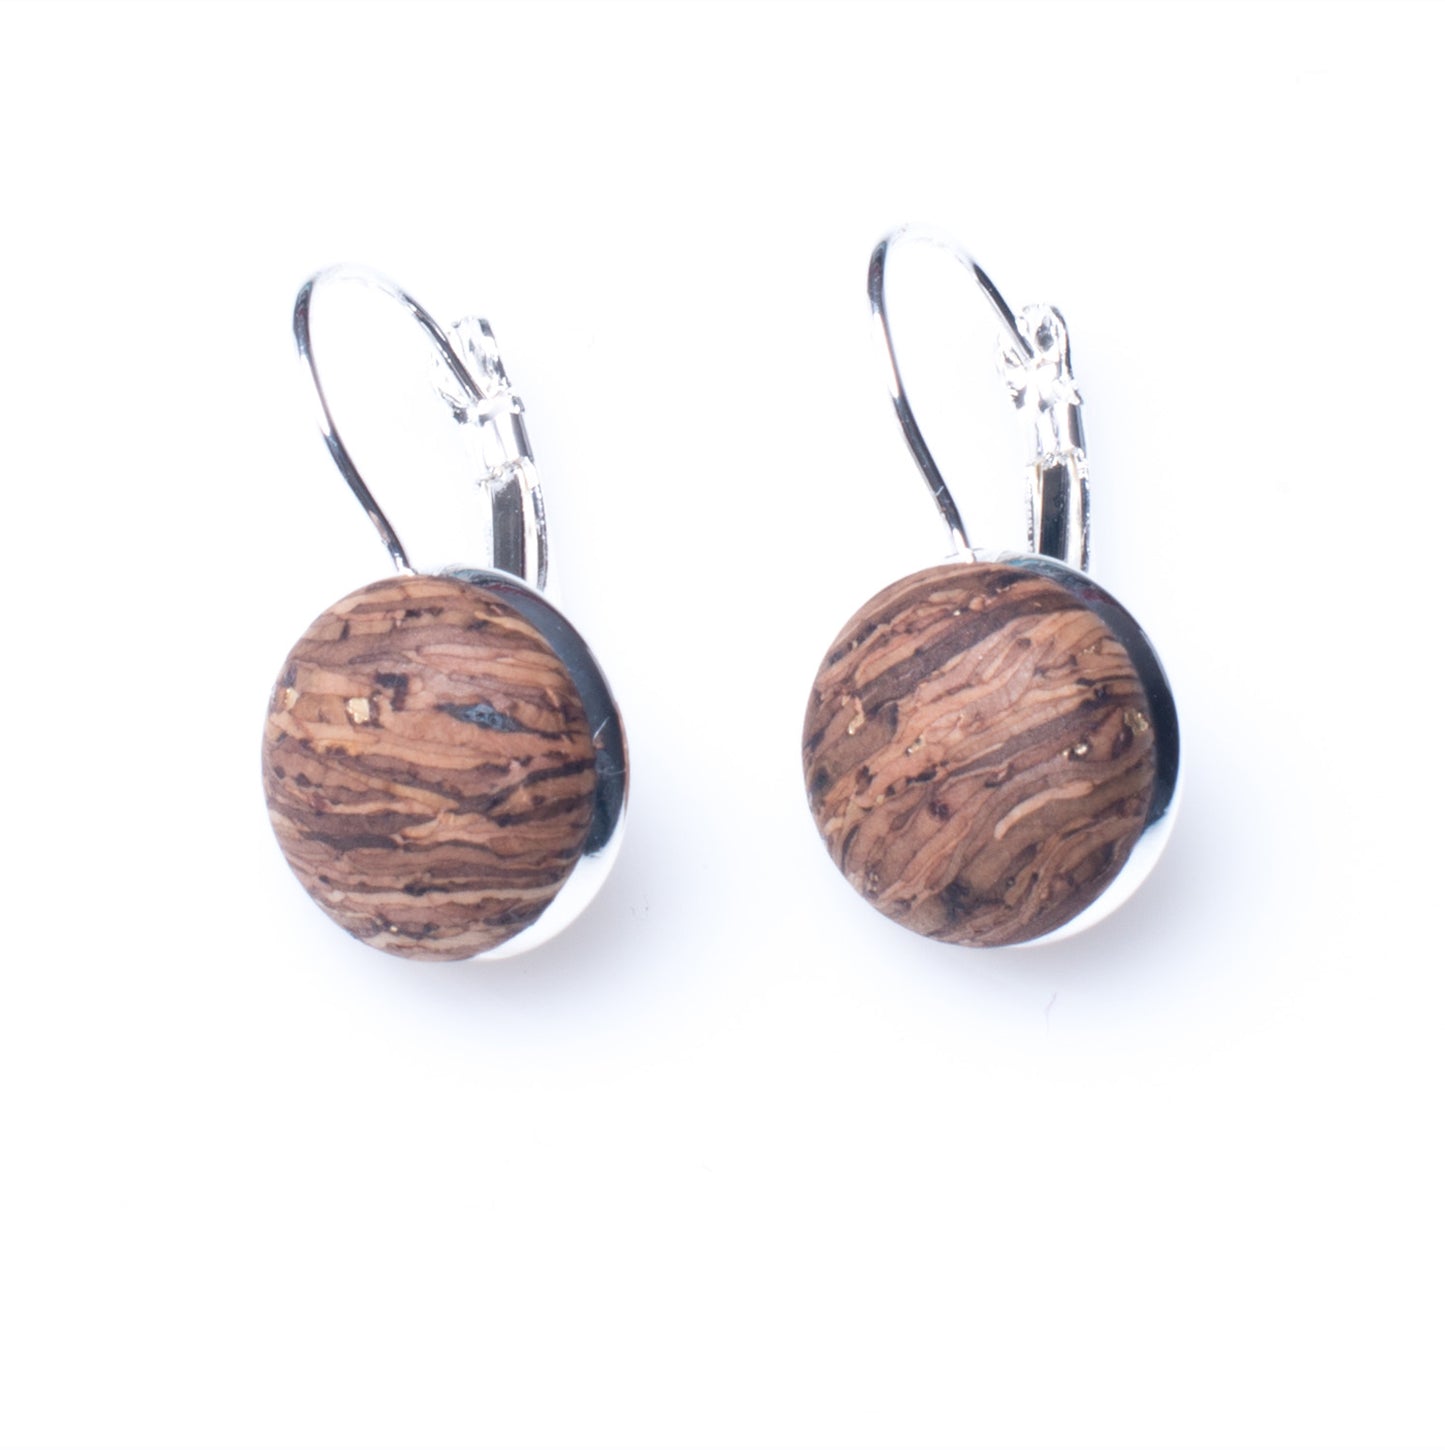 Hanging Cork Button Earrings | HowCork - The Cork Marketplace